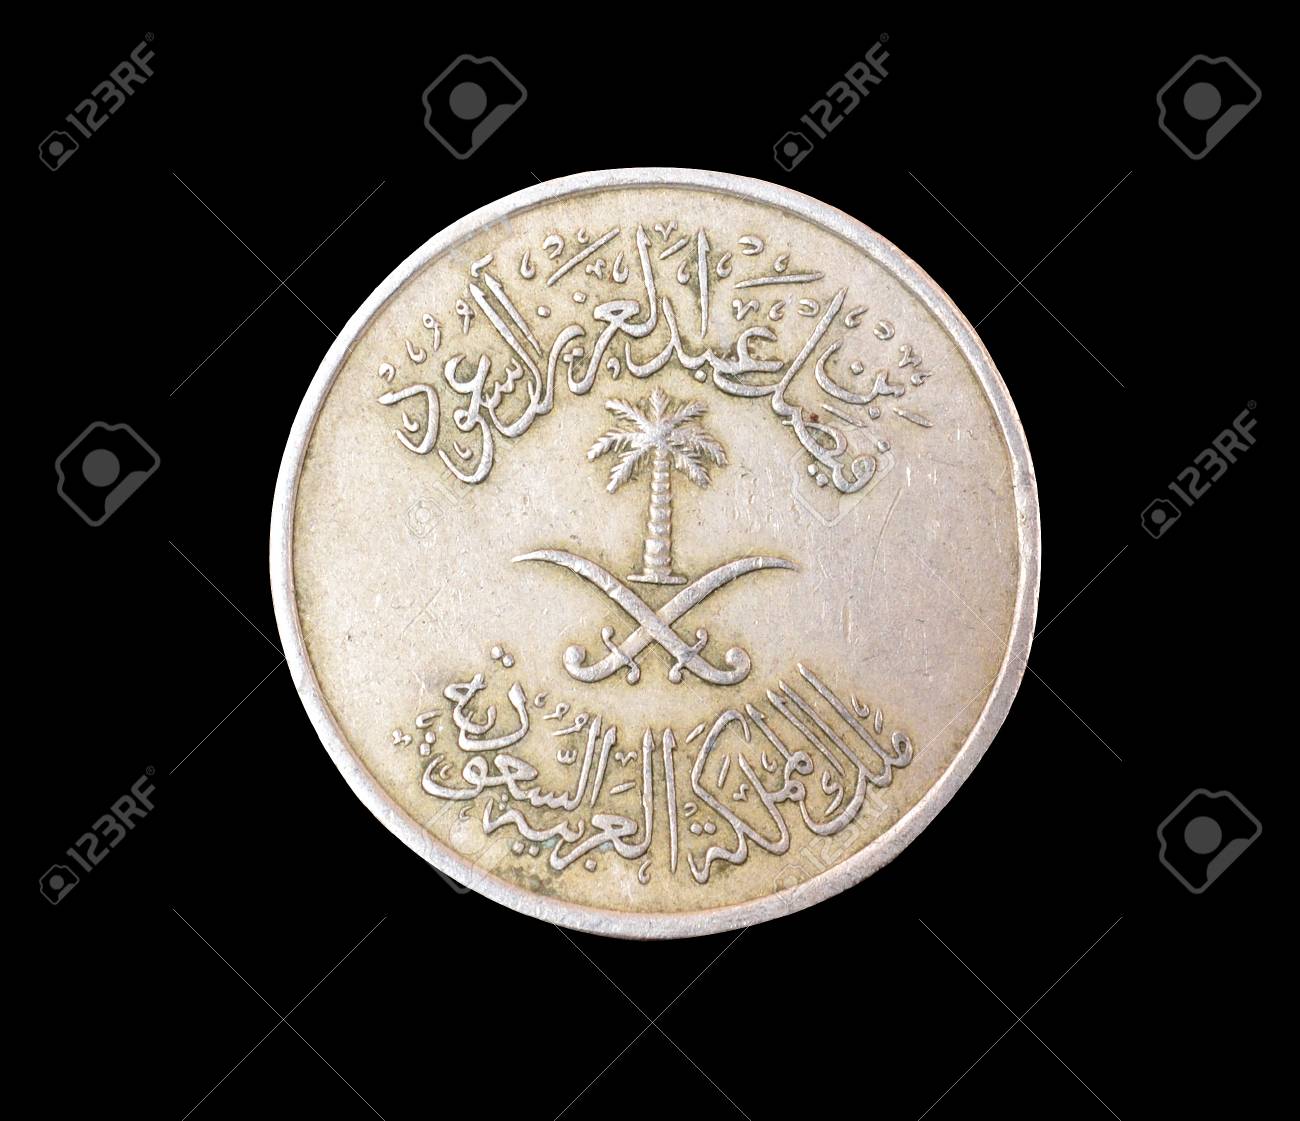 Coin With Crossed Swords And Palm Tree - KibrisPDR